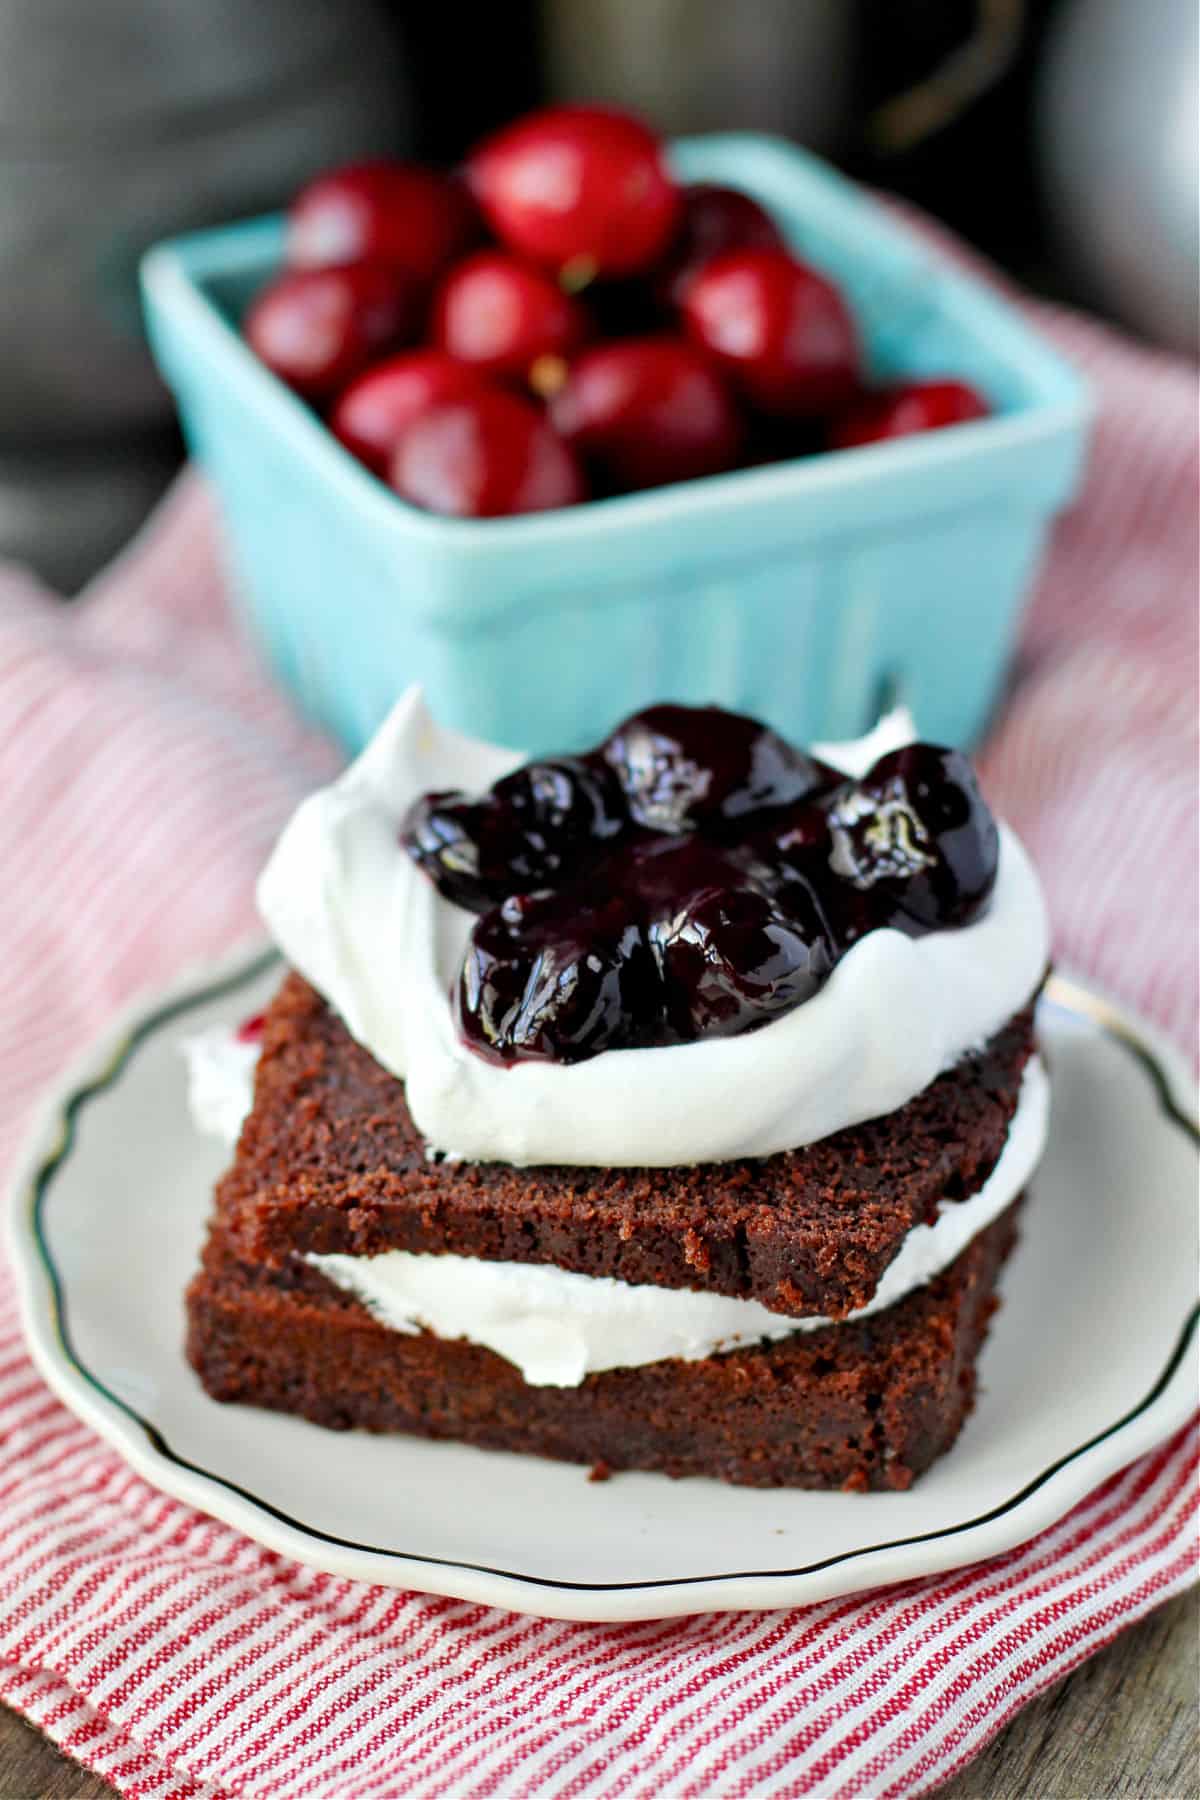 Black forest cake on a plate.